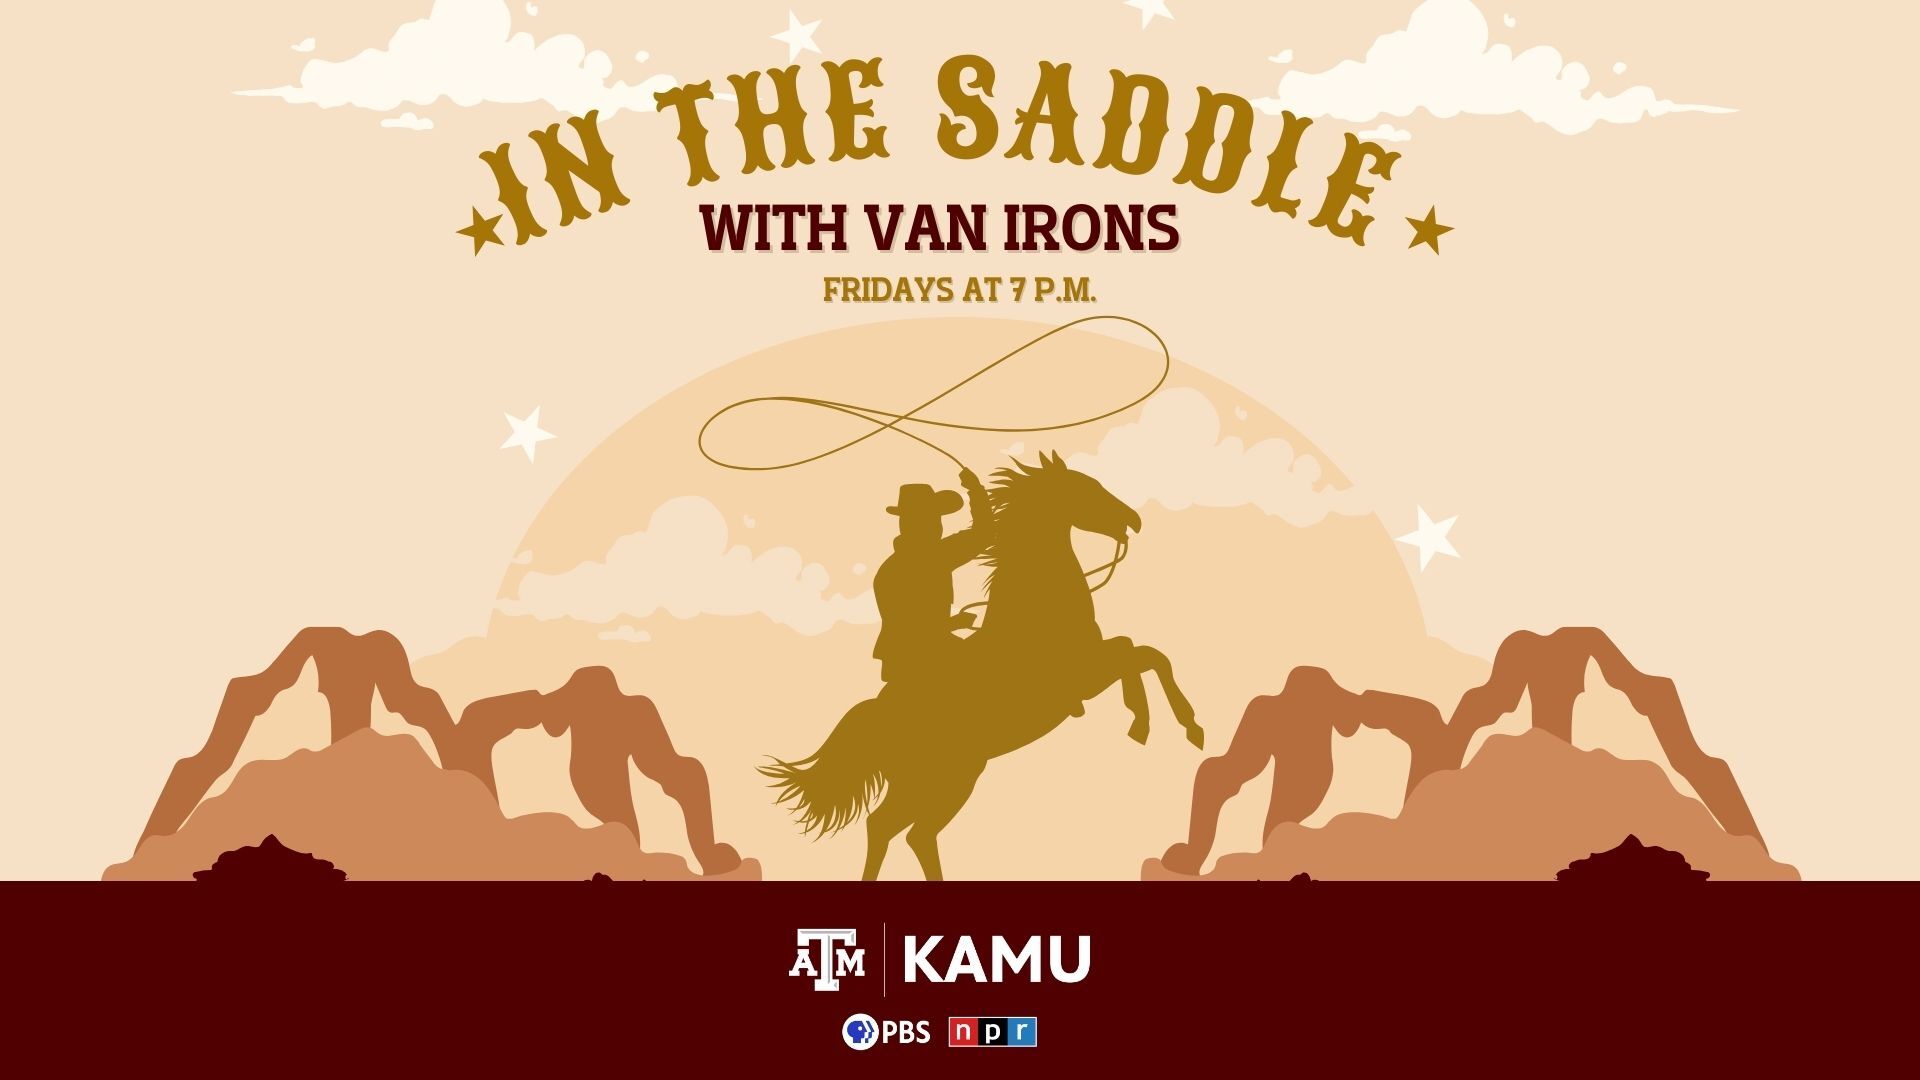 A cowboy riding a horse and twirling a lasso in front of mountains and the rising moon with the text "In The Saddle with Van Irons. Fridays at 7 PM."